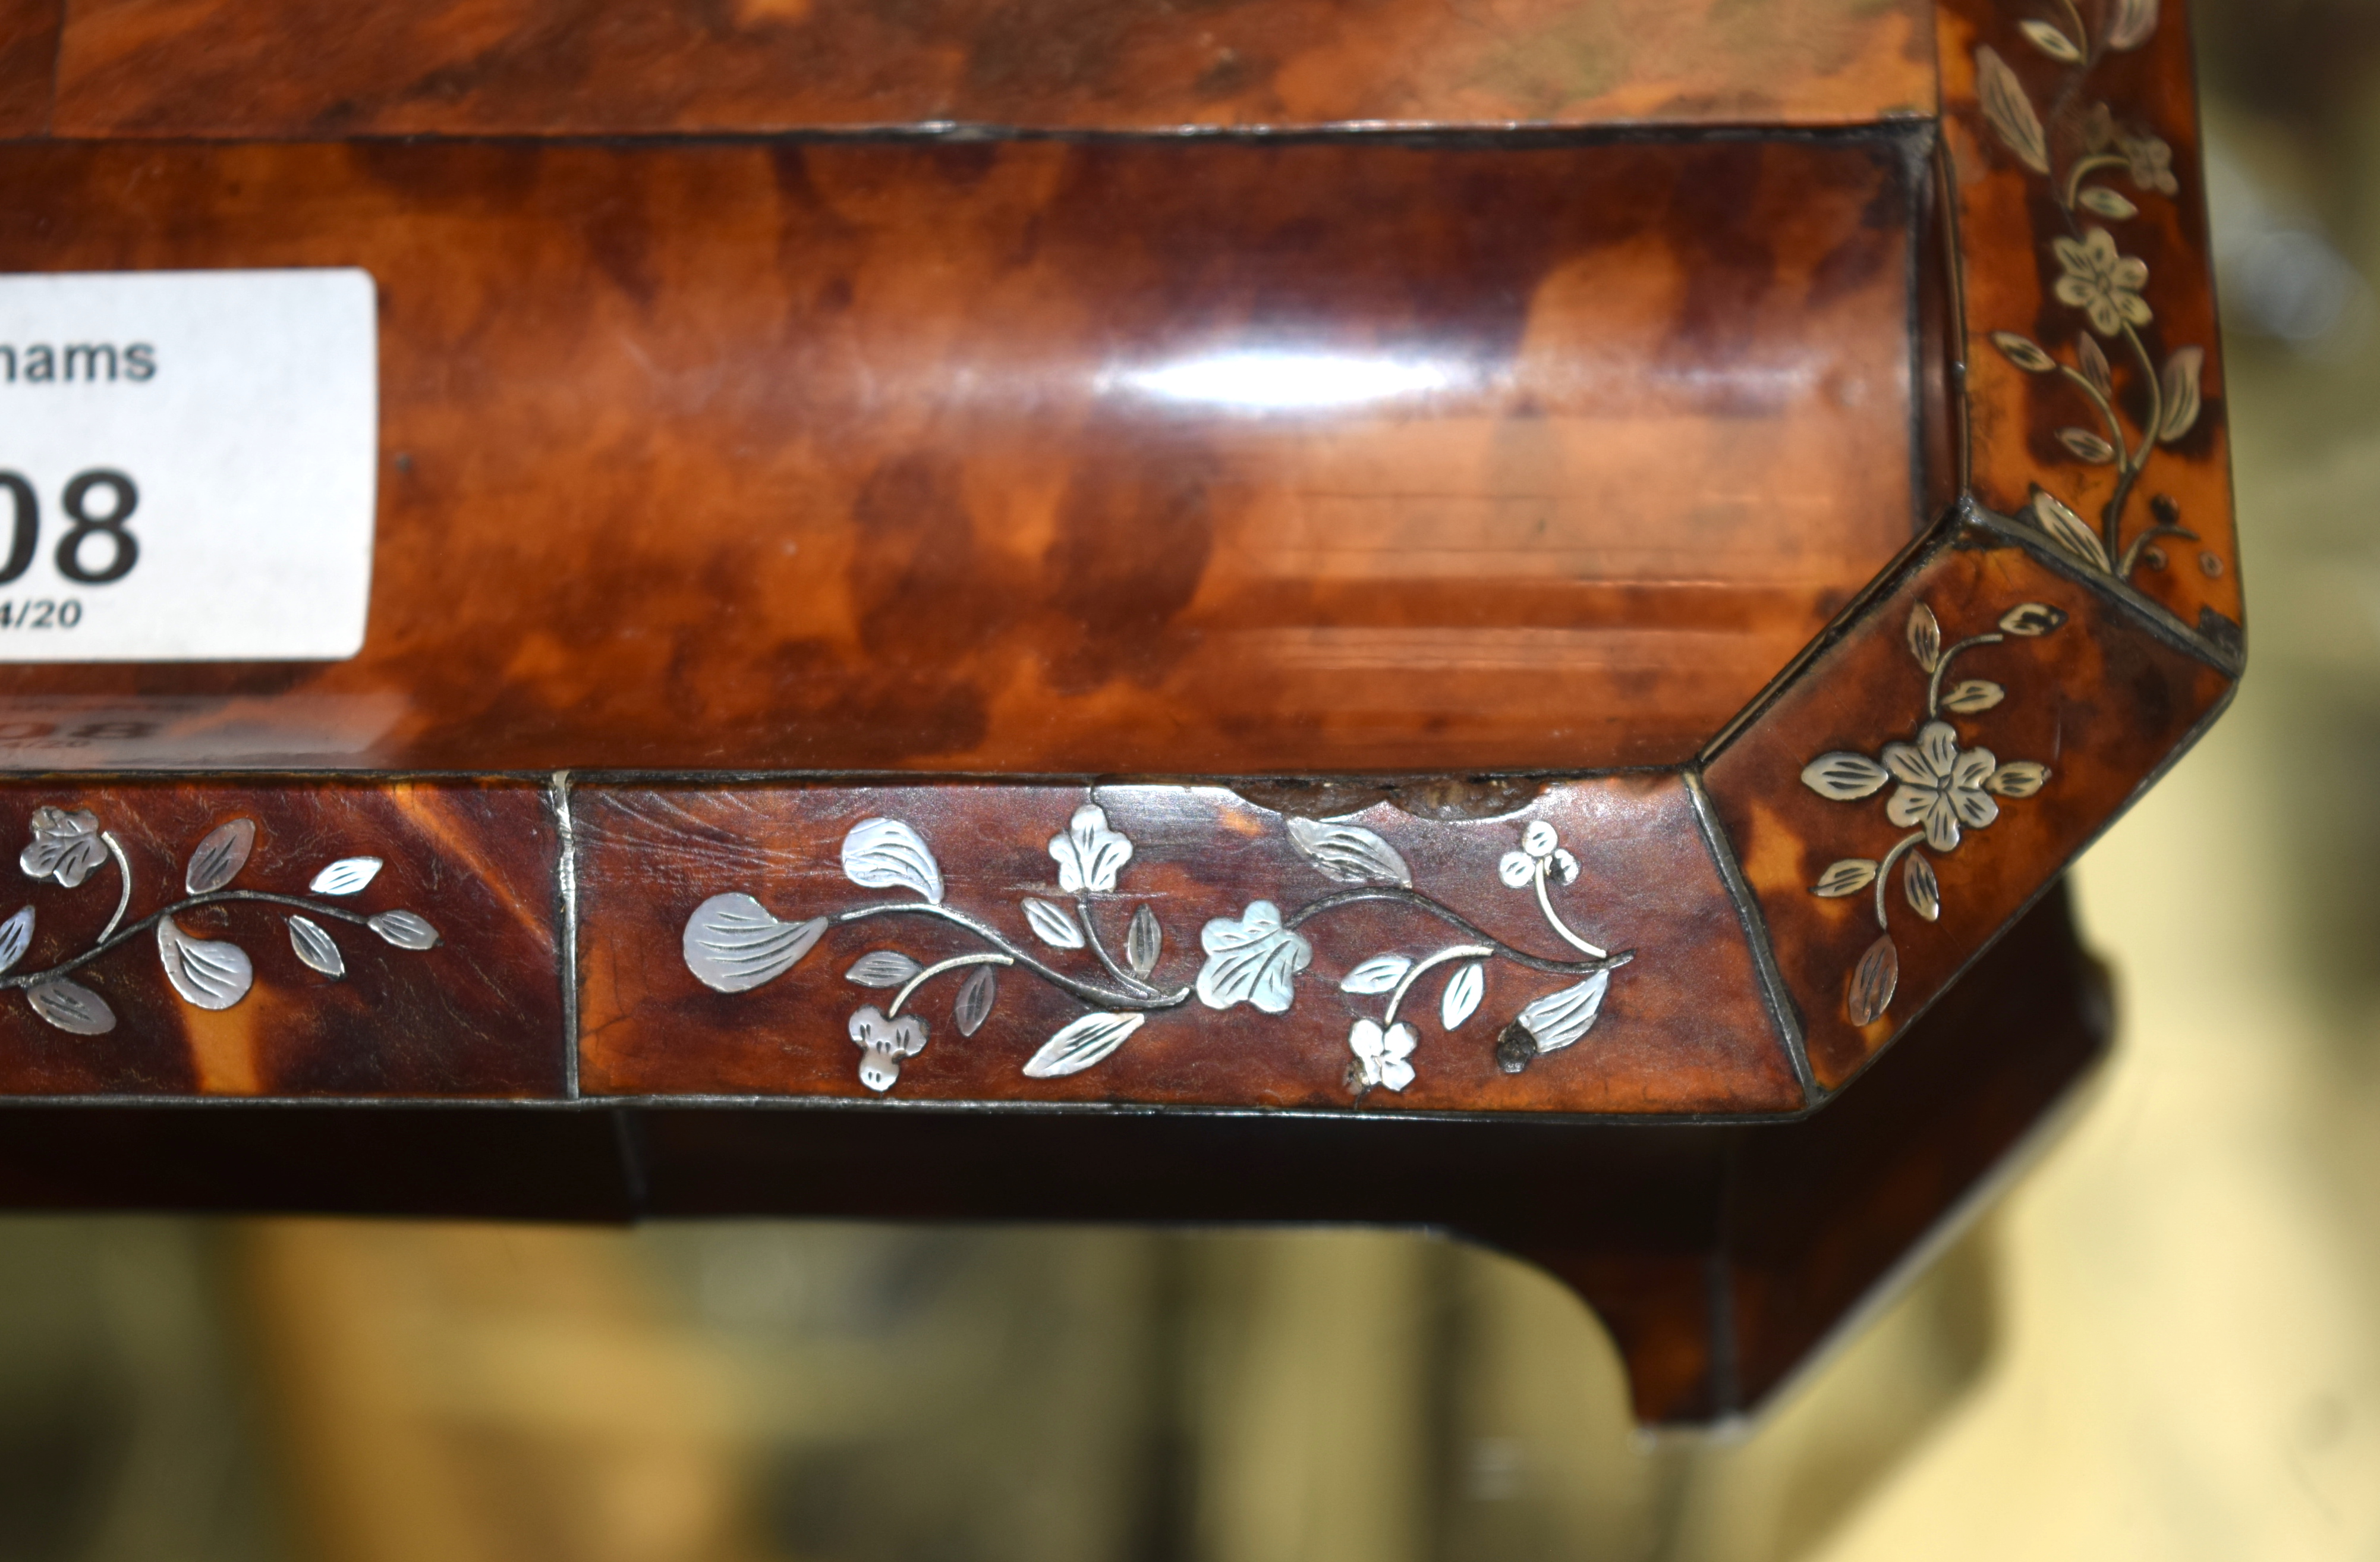 AN EARLY VICTORIAN MOTHER OF PEARL INLAID TORTOISESHELL INKWELL decorated with foliage. 21 cm x 14 c - Image 8 of 13